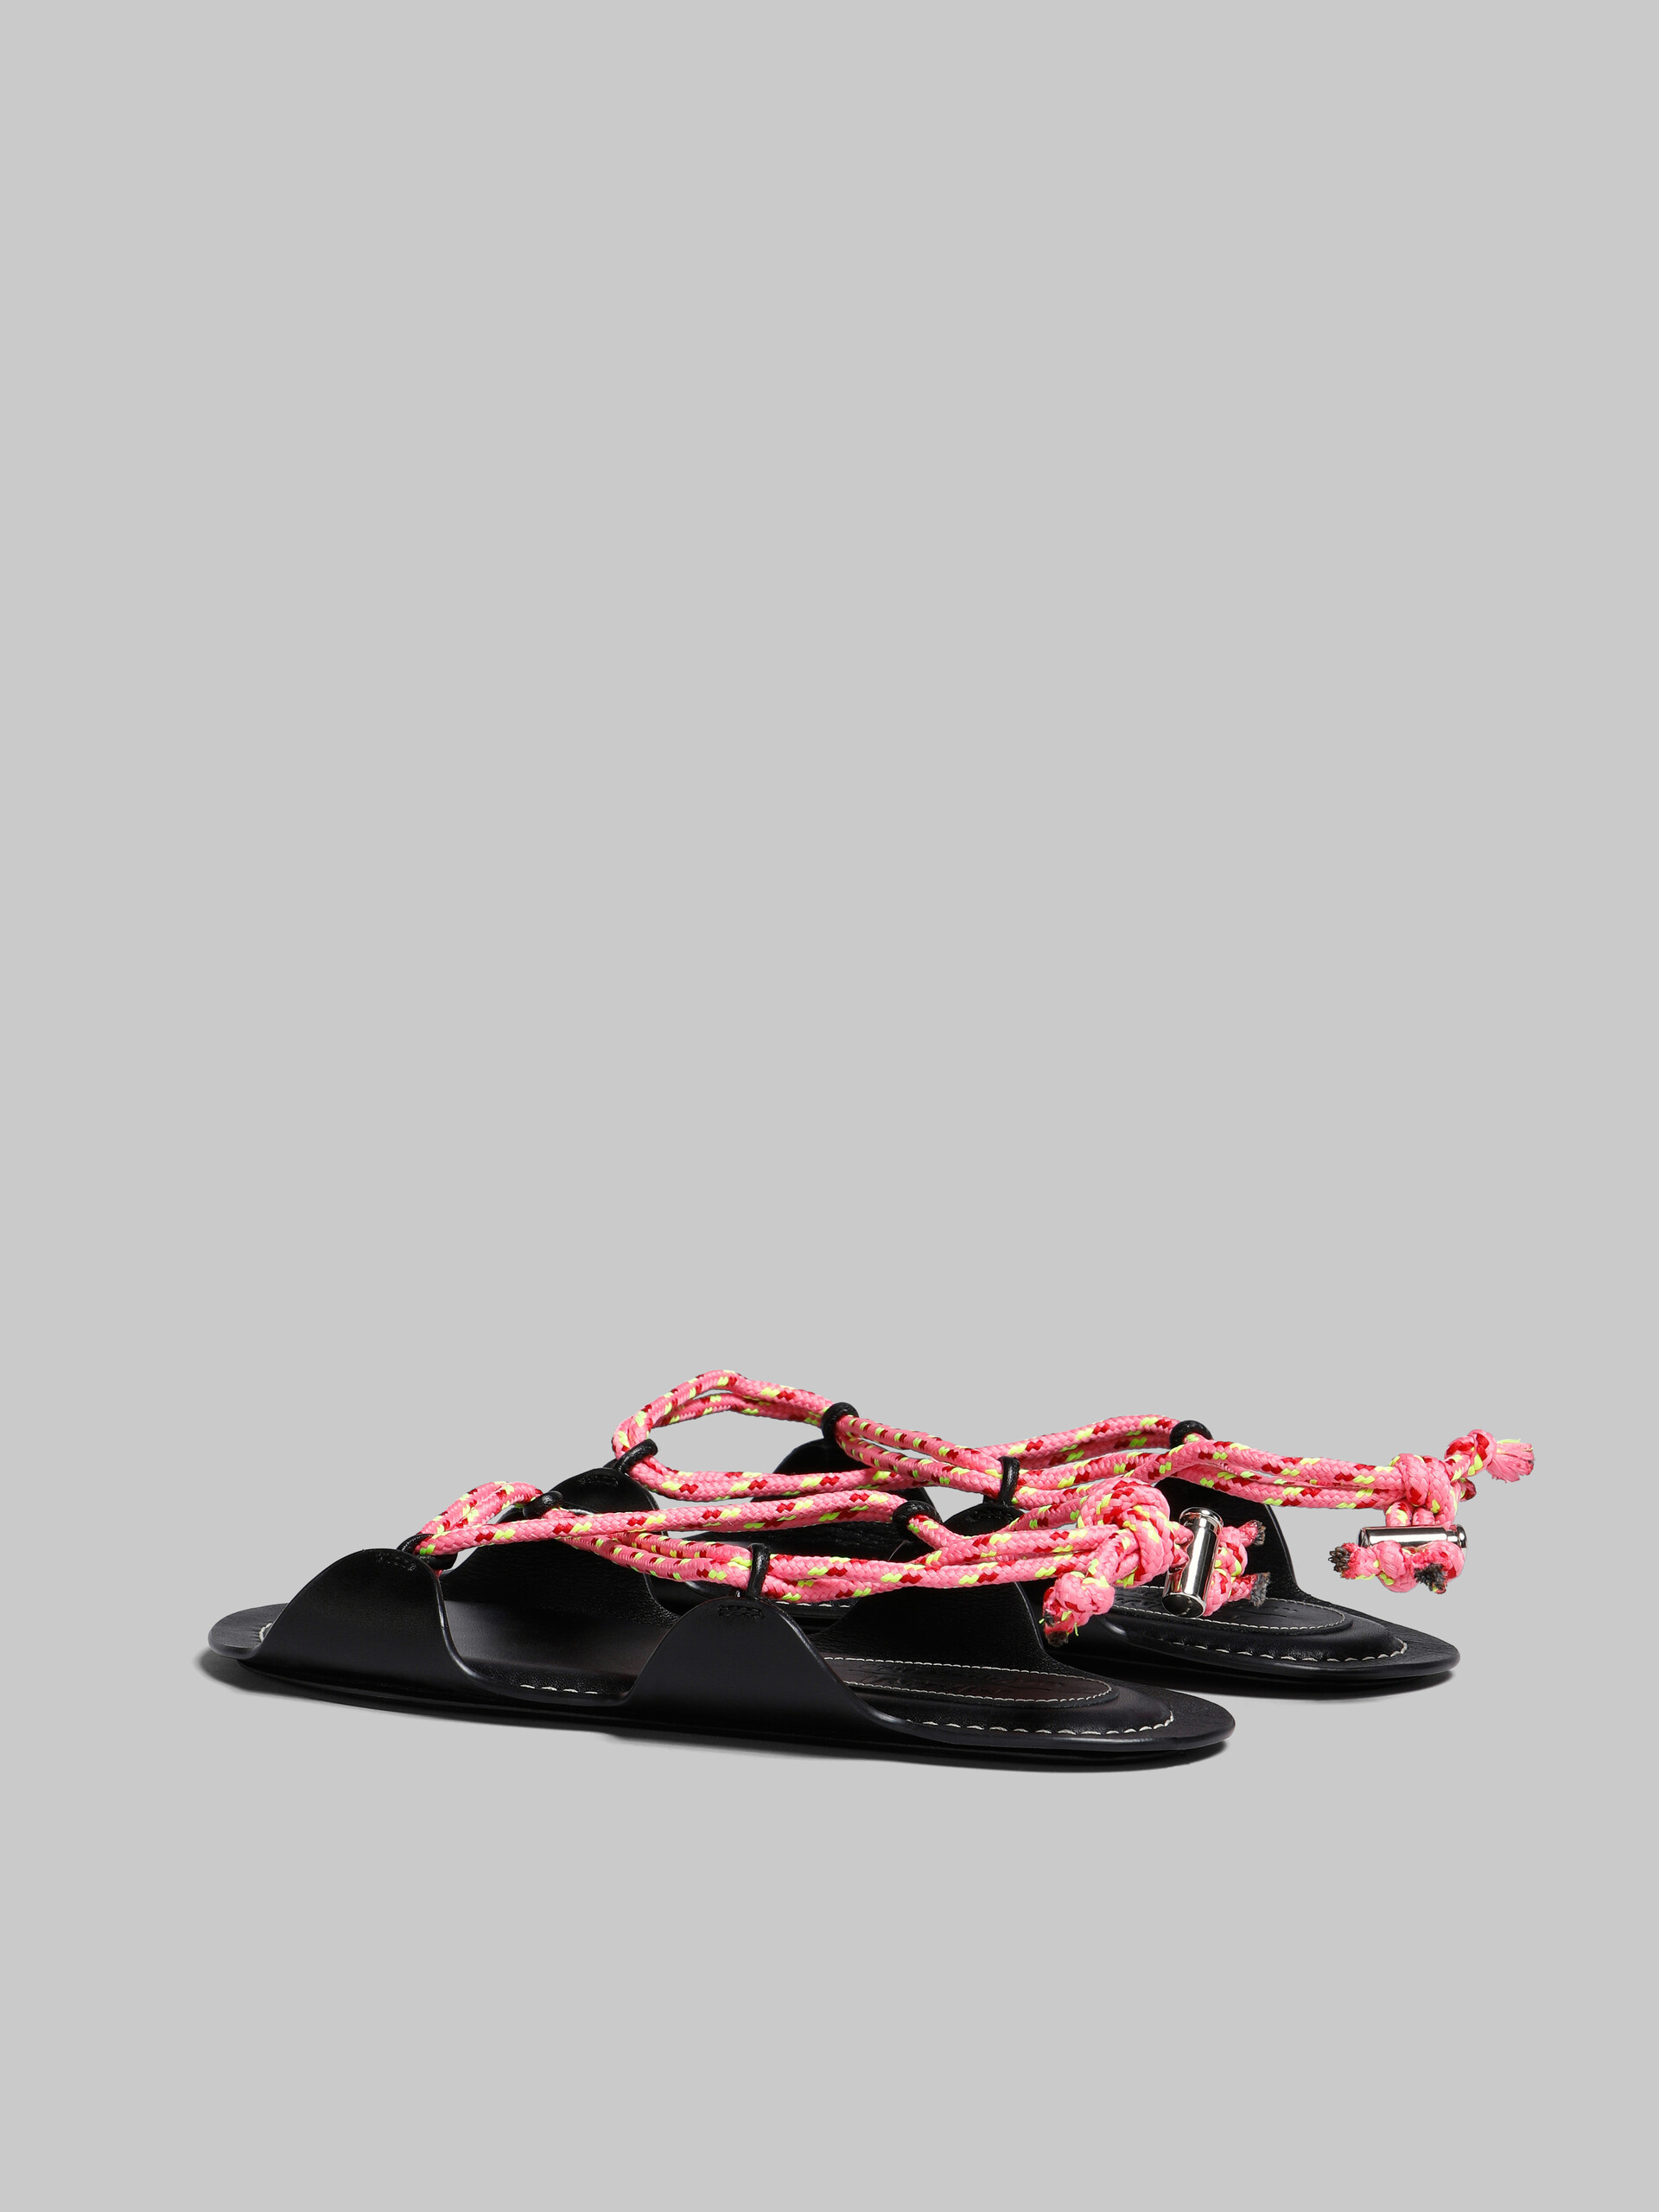 Marni x No Vacancy Inn - Black leather sandals with multicolour rope - Sandals - Image 3